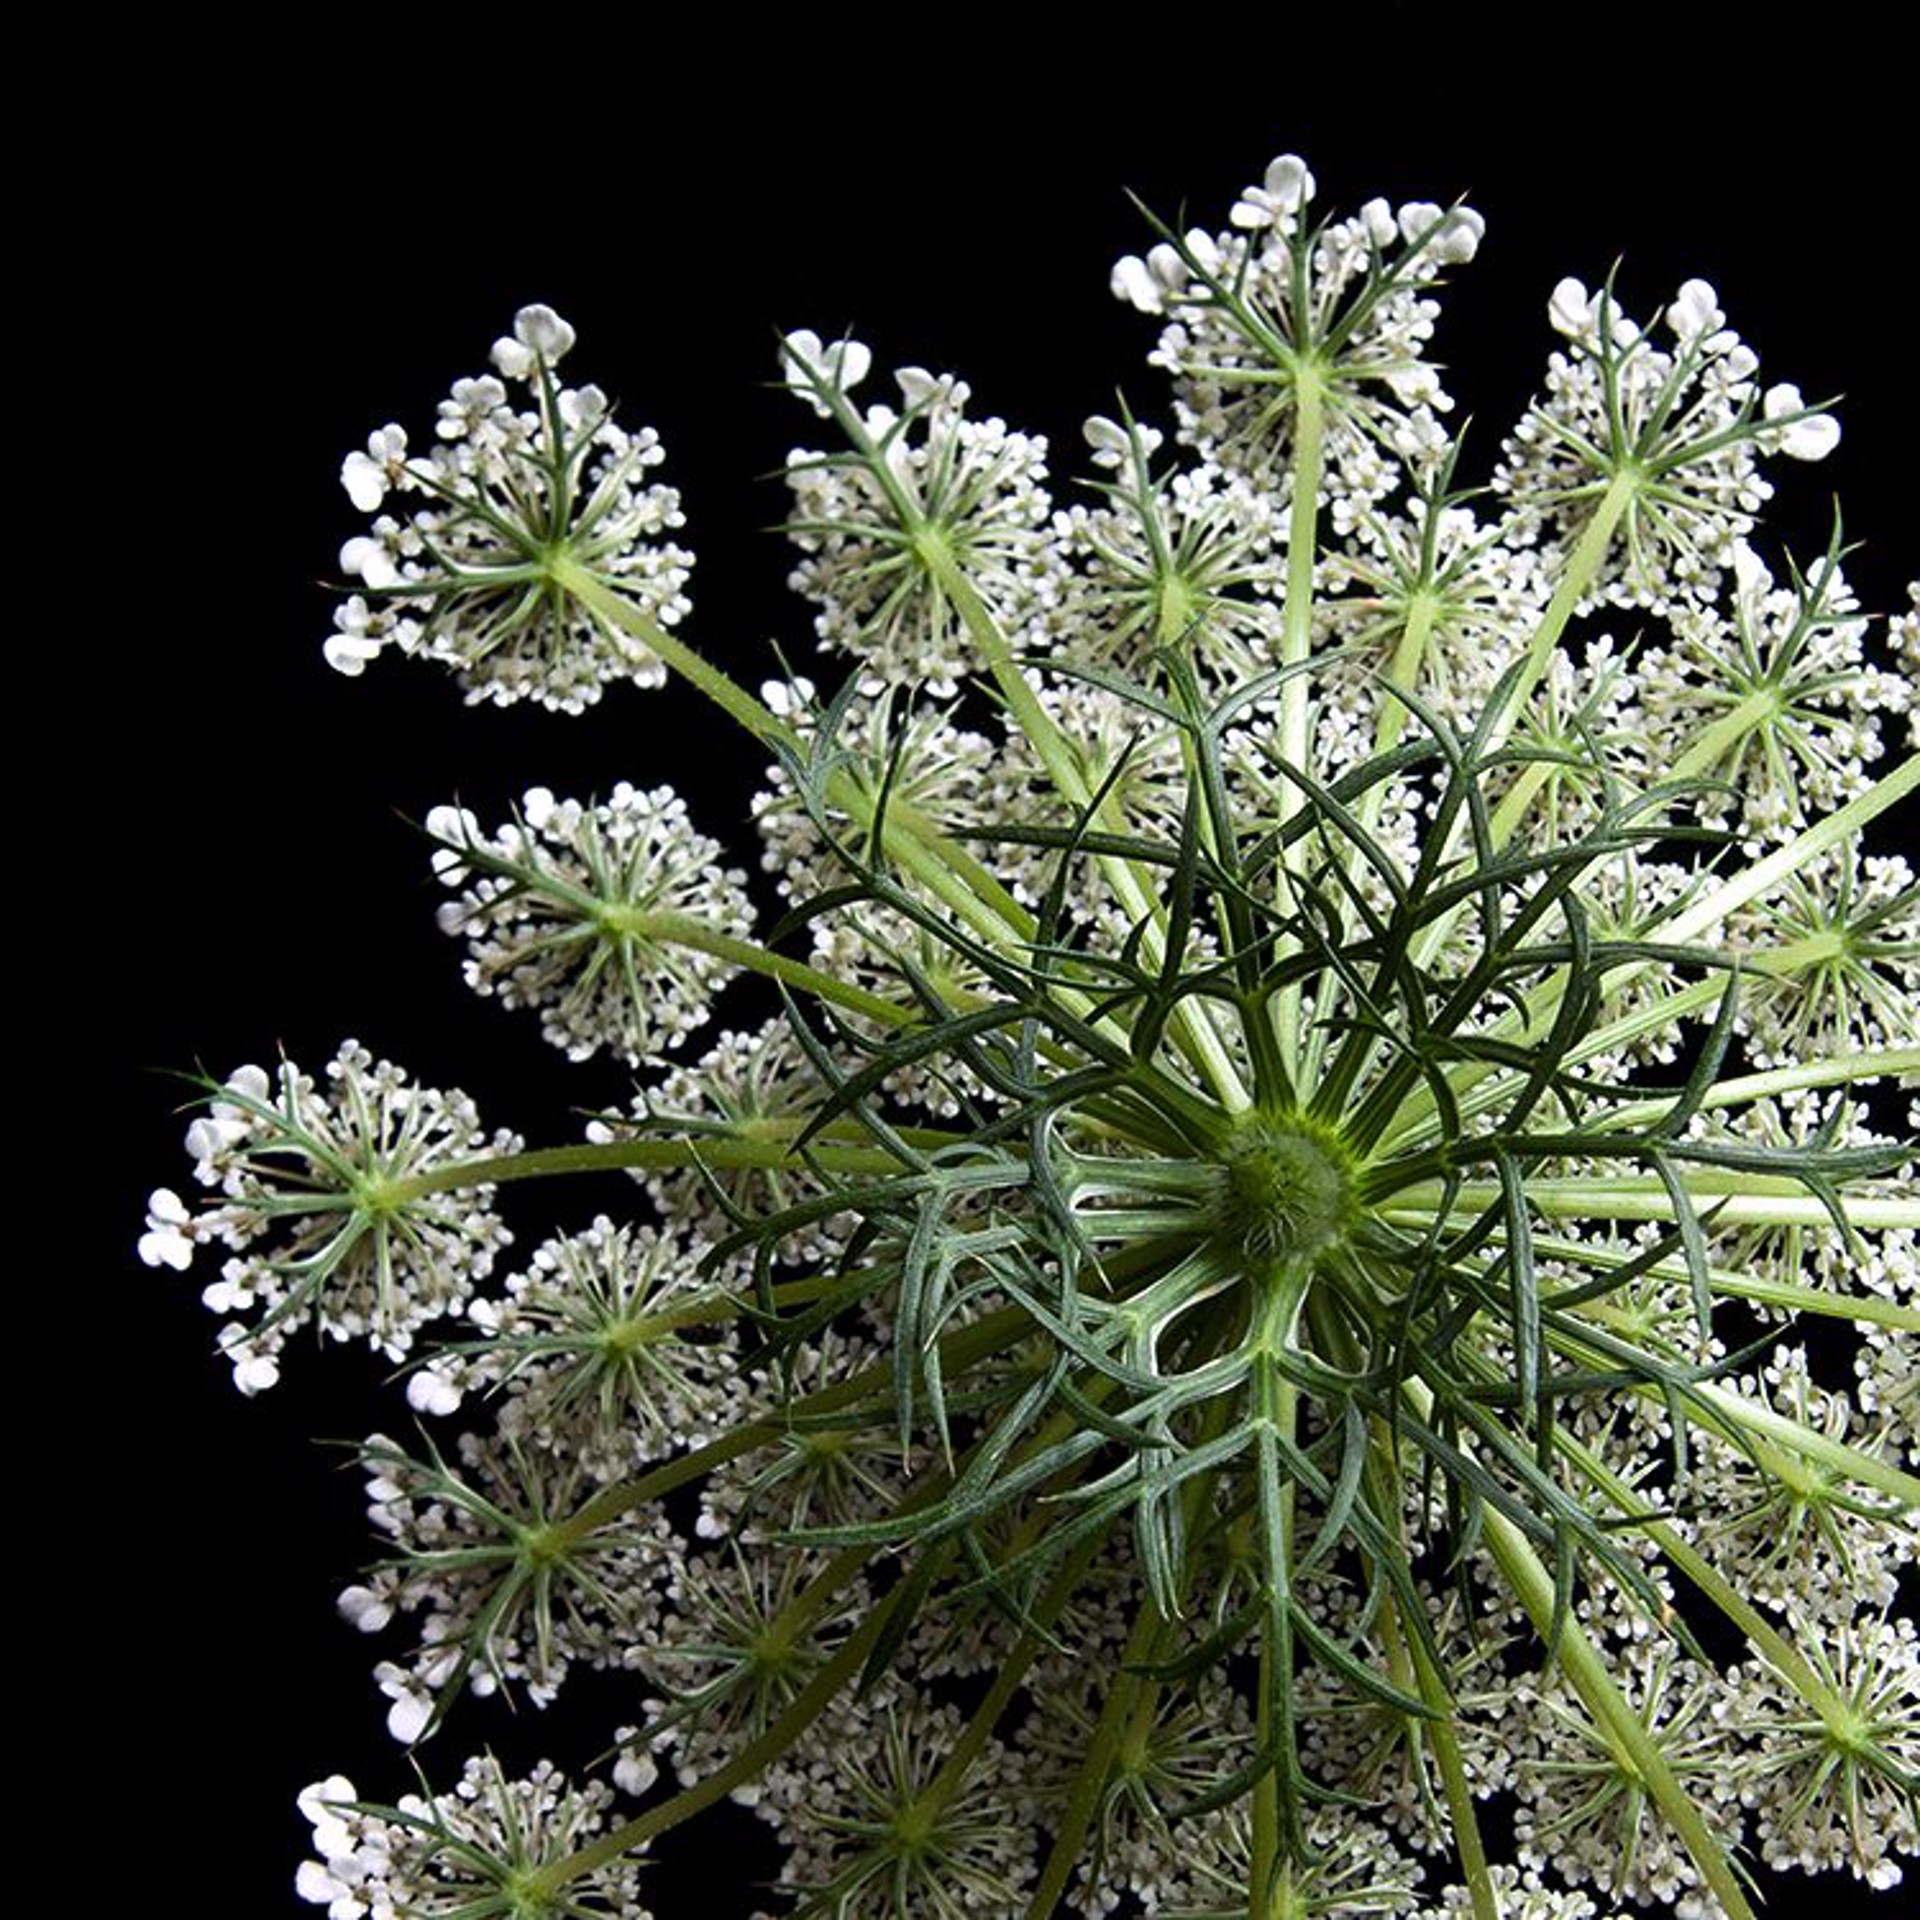 Queen Anne's Lace, 3997, 2018 by Molly Wood